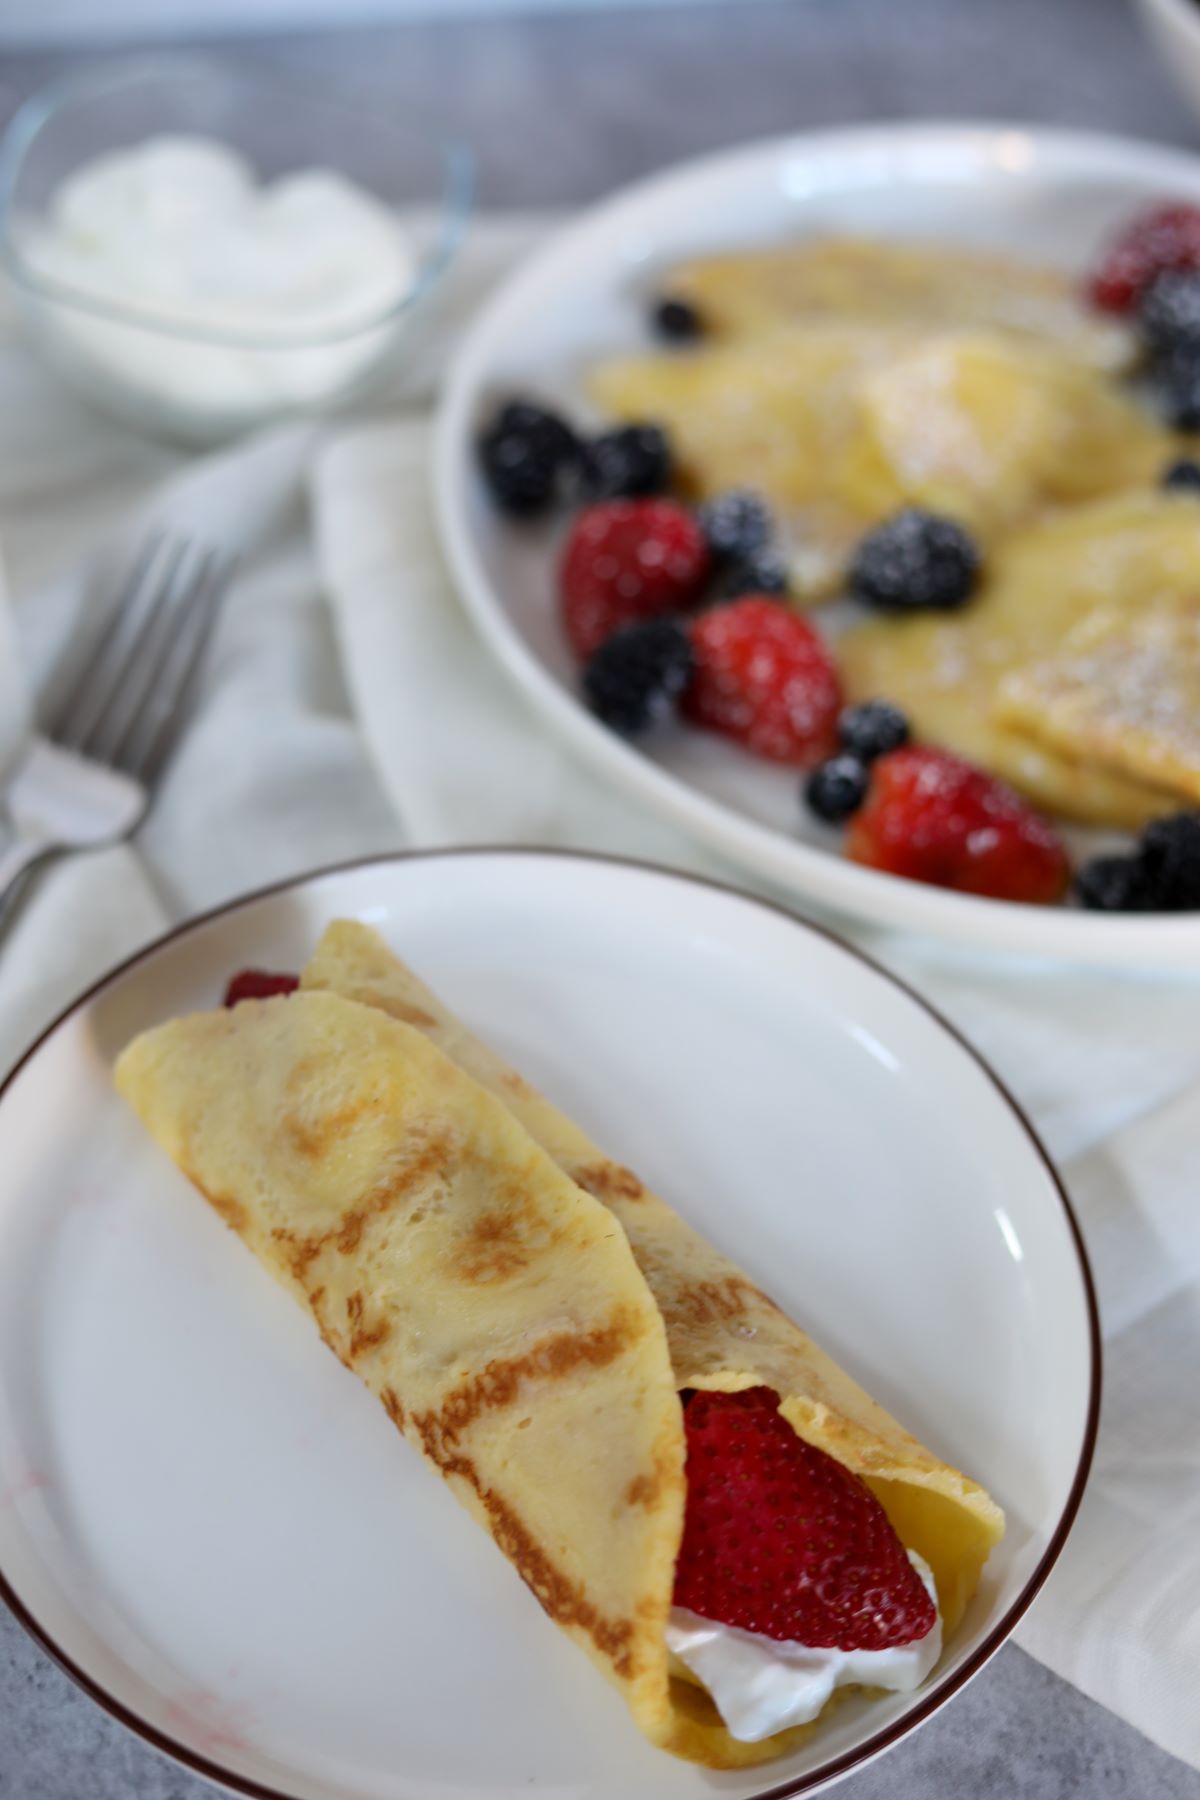 rolled crepe with fresh strawberries